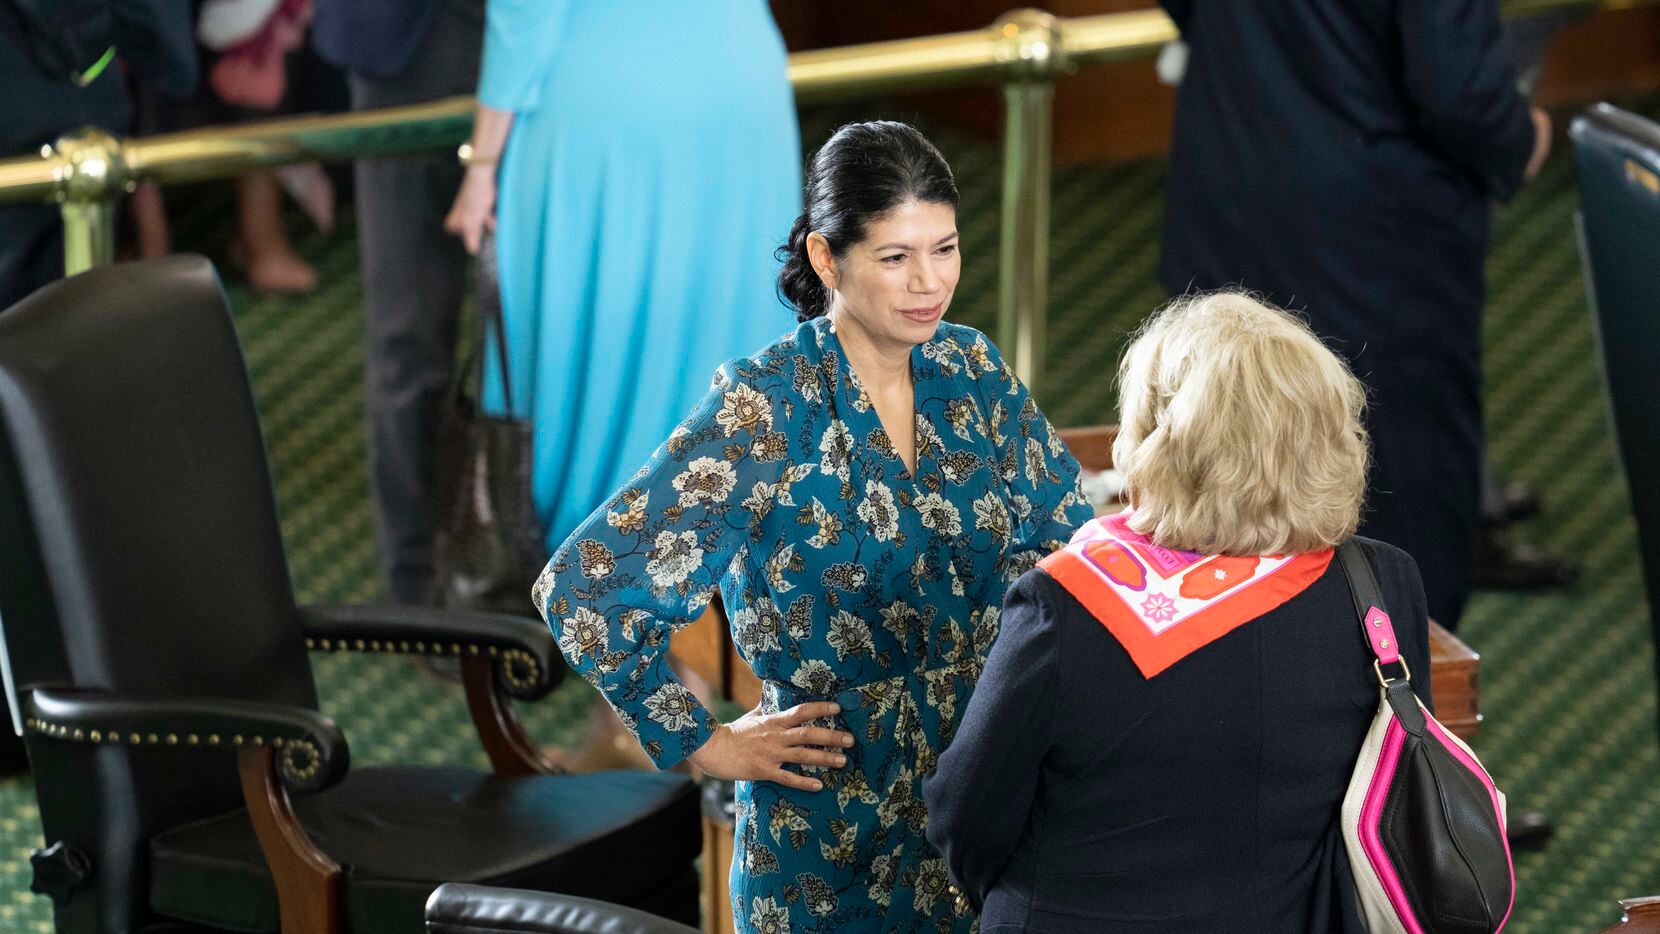 Senate Democratic Caucus Chairwoman Carol Alvarado of Houston, shown on the Senate floor on opening day of the special session, blasted Republicans' election bill Friday. “The only thing this bill makes easy is voter intimidation," she said. "It allows untrained, hyperpartisan, hired bullies into our neighborhood as poll watchers, giving them unfettered access to intimidate election volunteers. And we can't stand for that.”